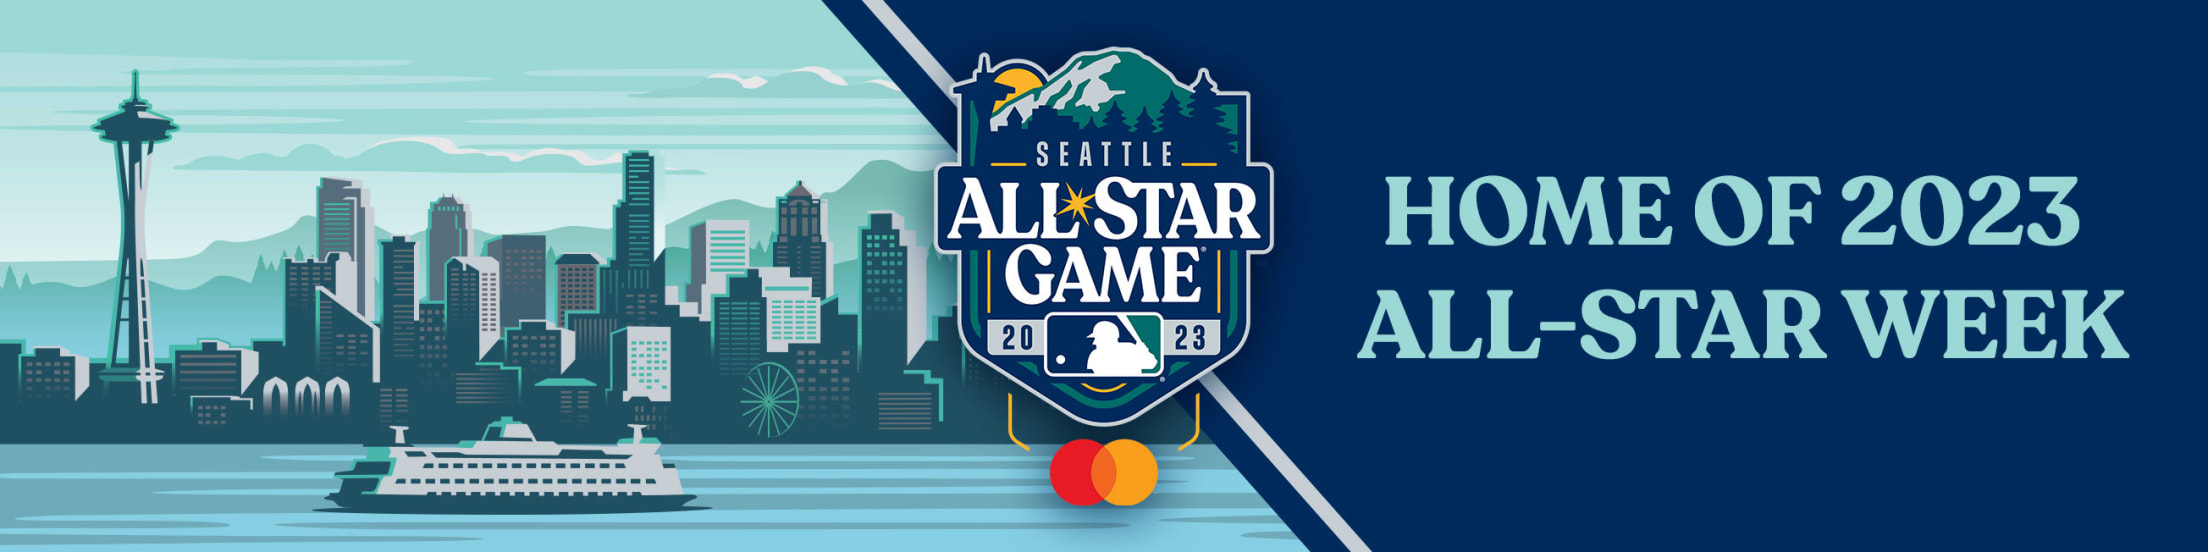 MLB All-Star schedule 2023: Times, TV channels for Home Run Derby, futures  & celebrity softball games